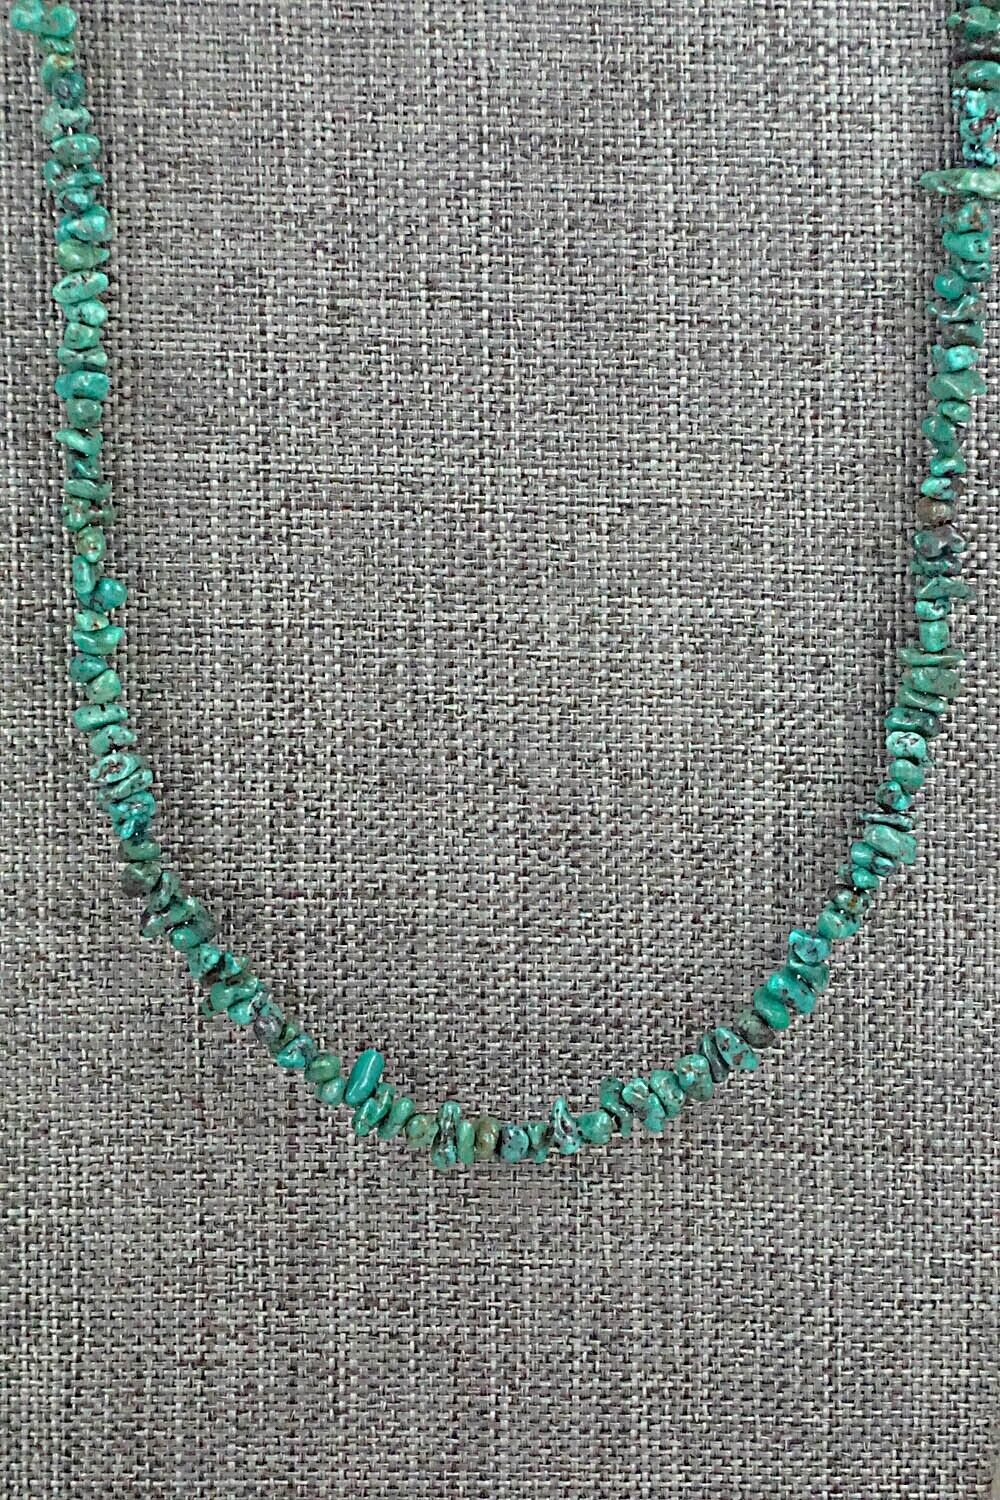 Turquoise & Sterling Silver Necklace 48" - Doreen Jake